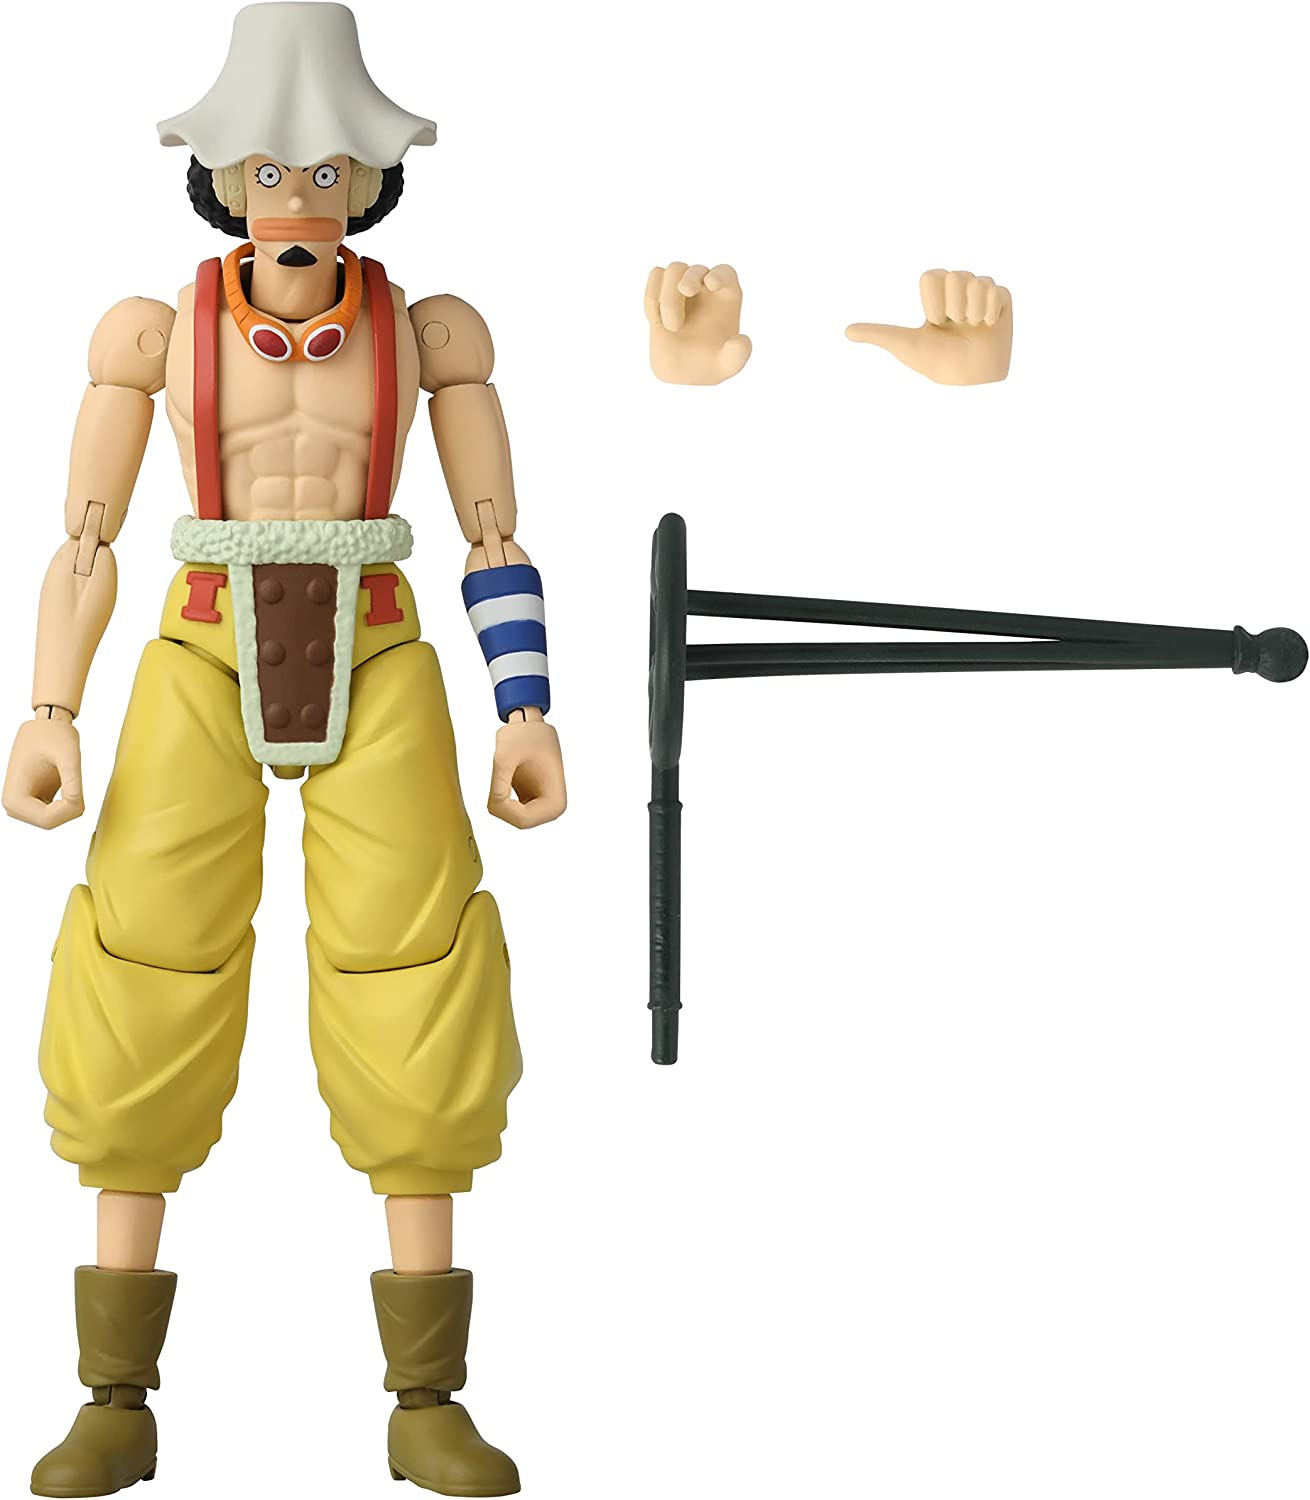 Bandai America's Anime Heroes Line Expands with ONE PIECE - Luffy, Zoro and  Sanji